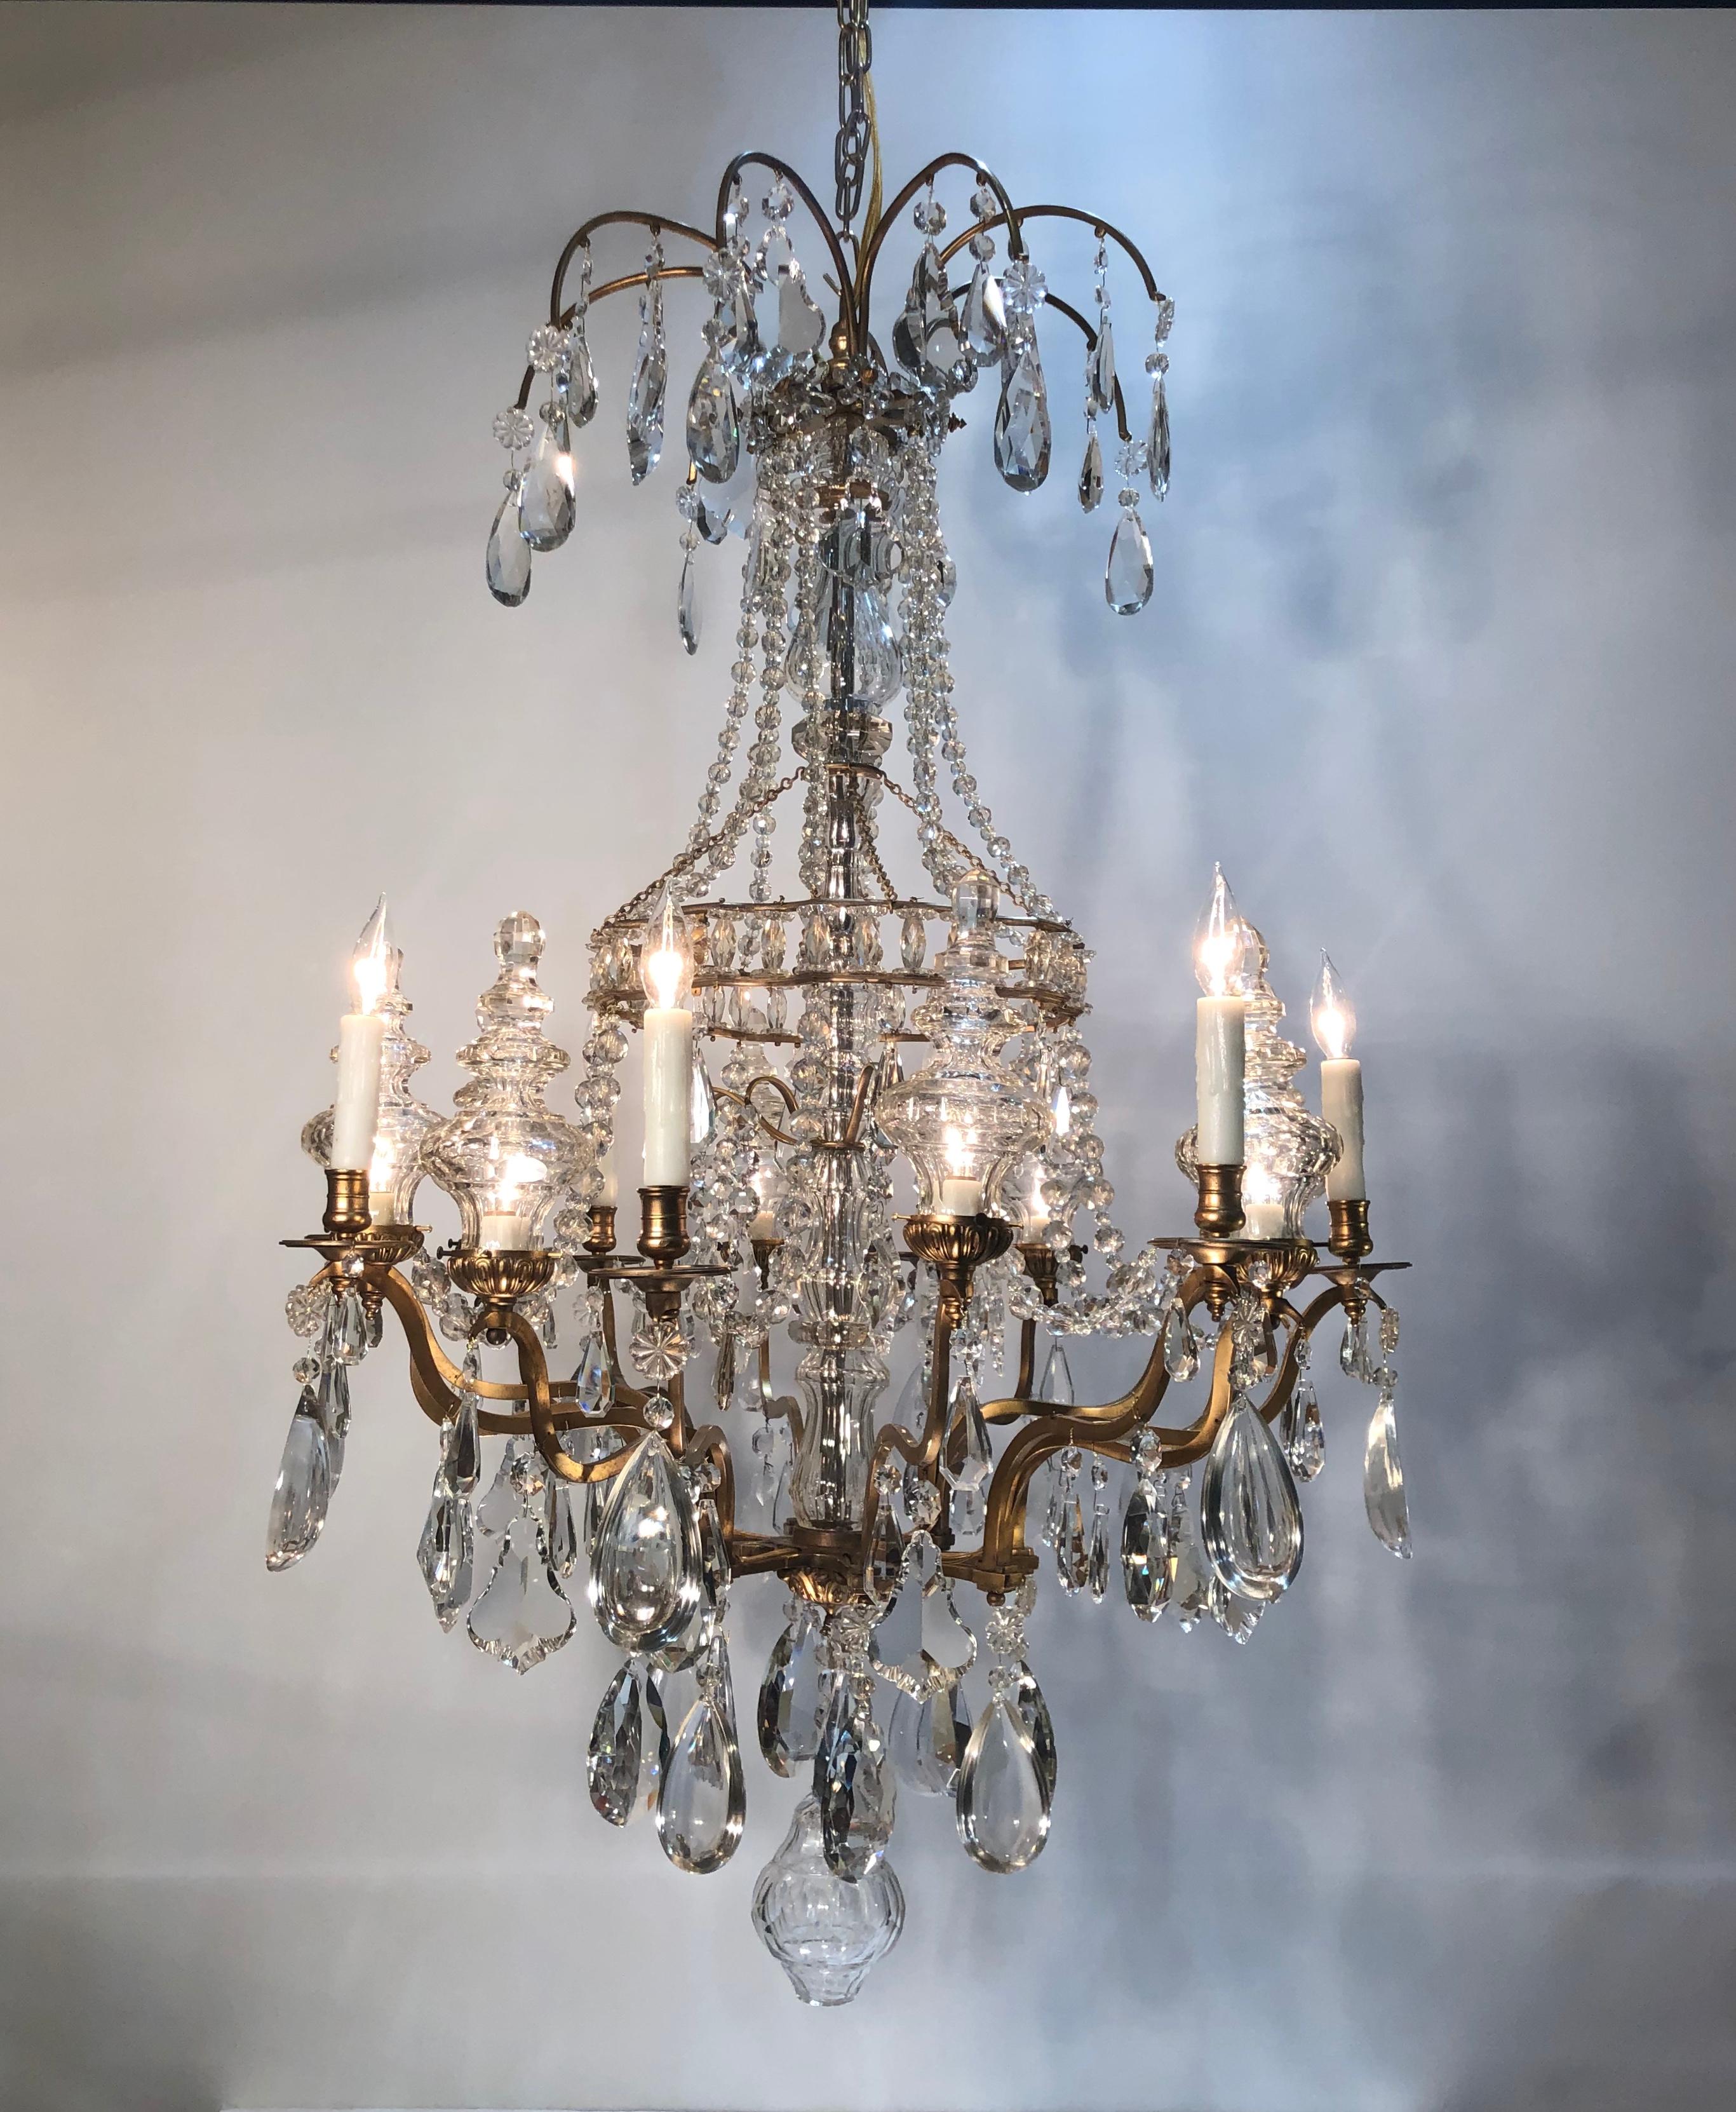 Magnificent 16-light French chandelier from the late 19th century. Very fine gilt bronze and crystal Louis XV style chandelier. Faceted cut crystal column surrounded with open gilded bronze birdcage frame. 16 branches, all adorned with faceted cut